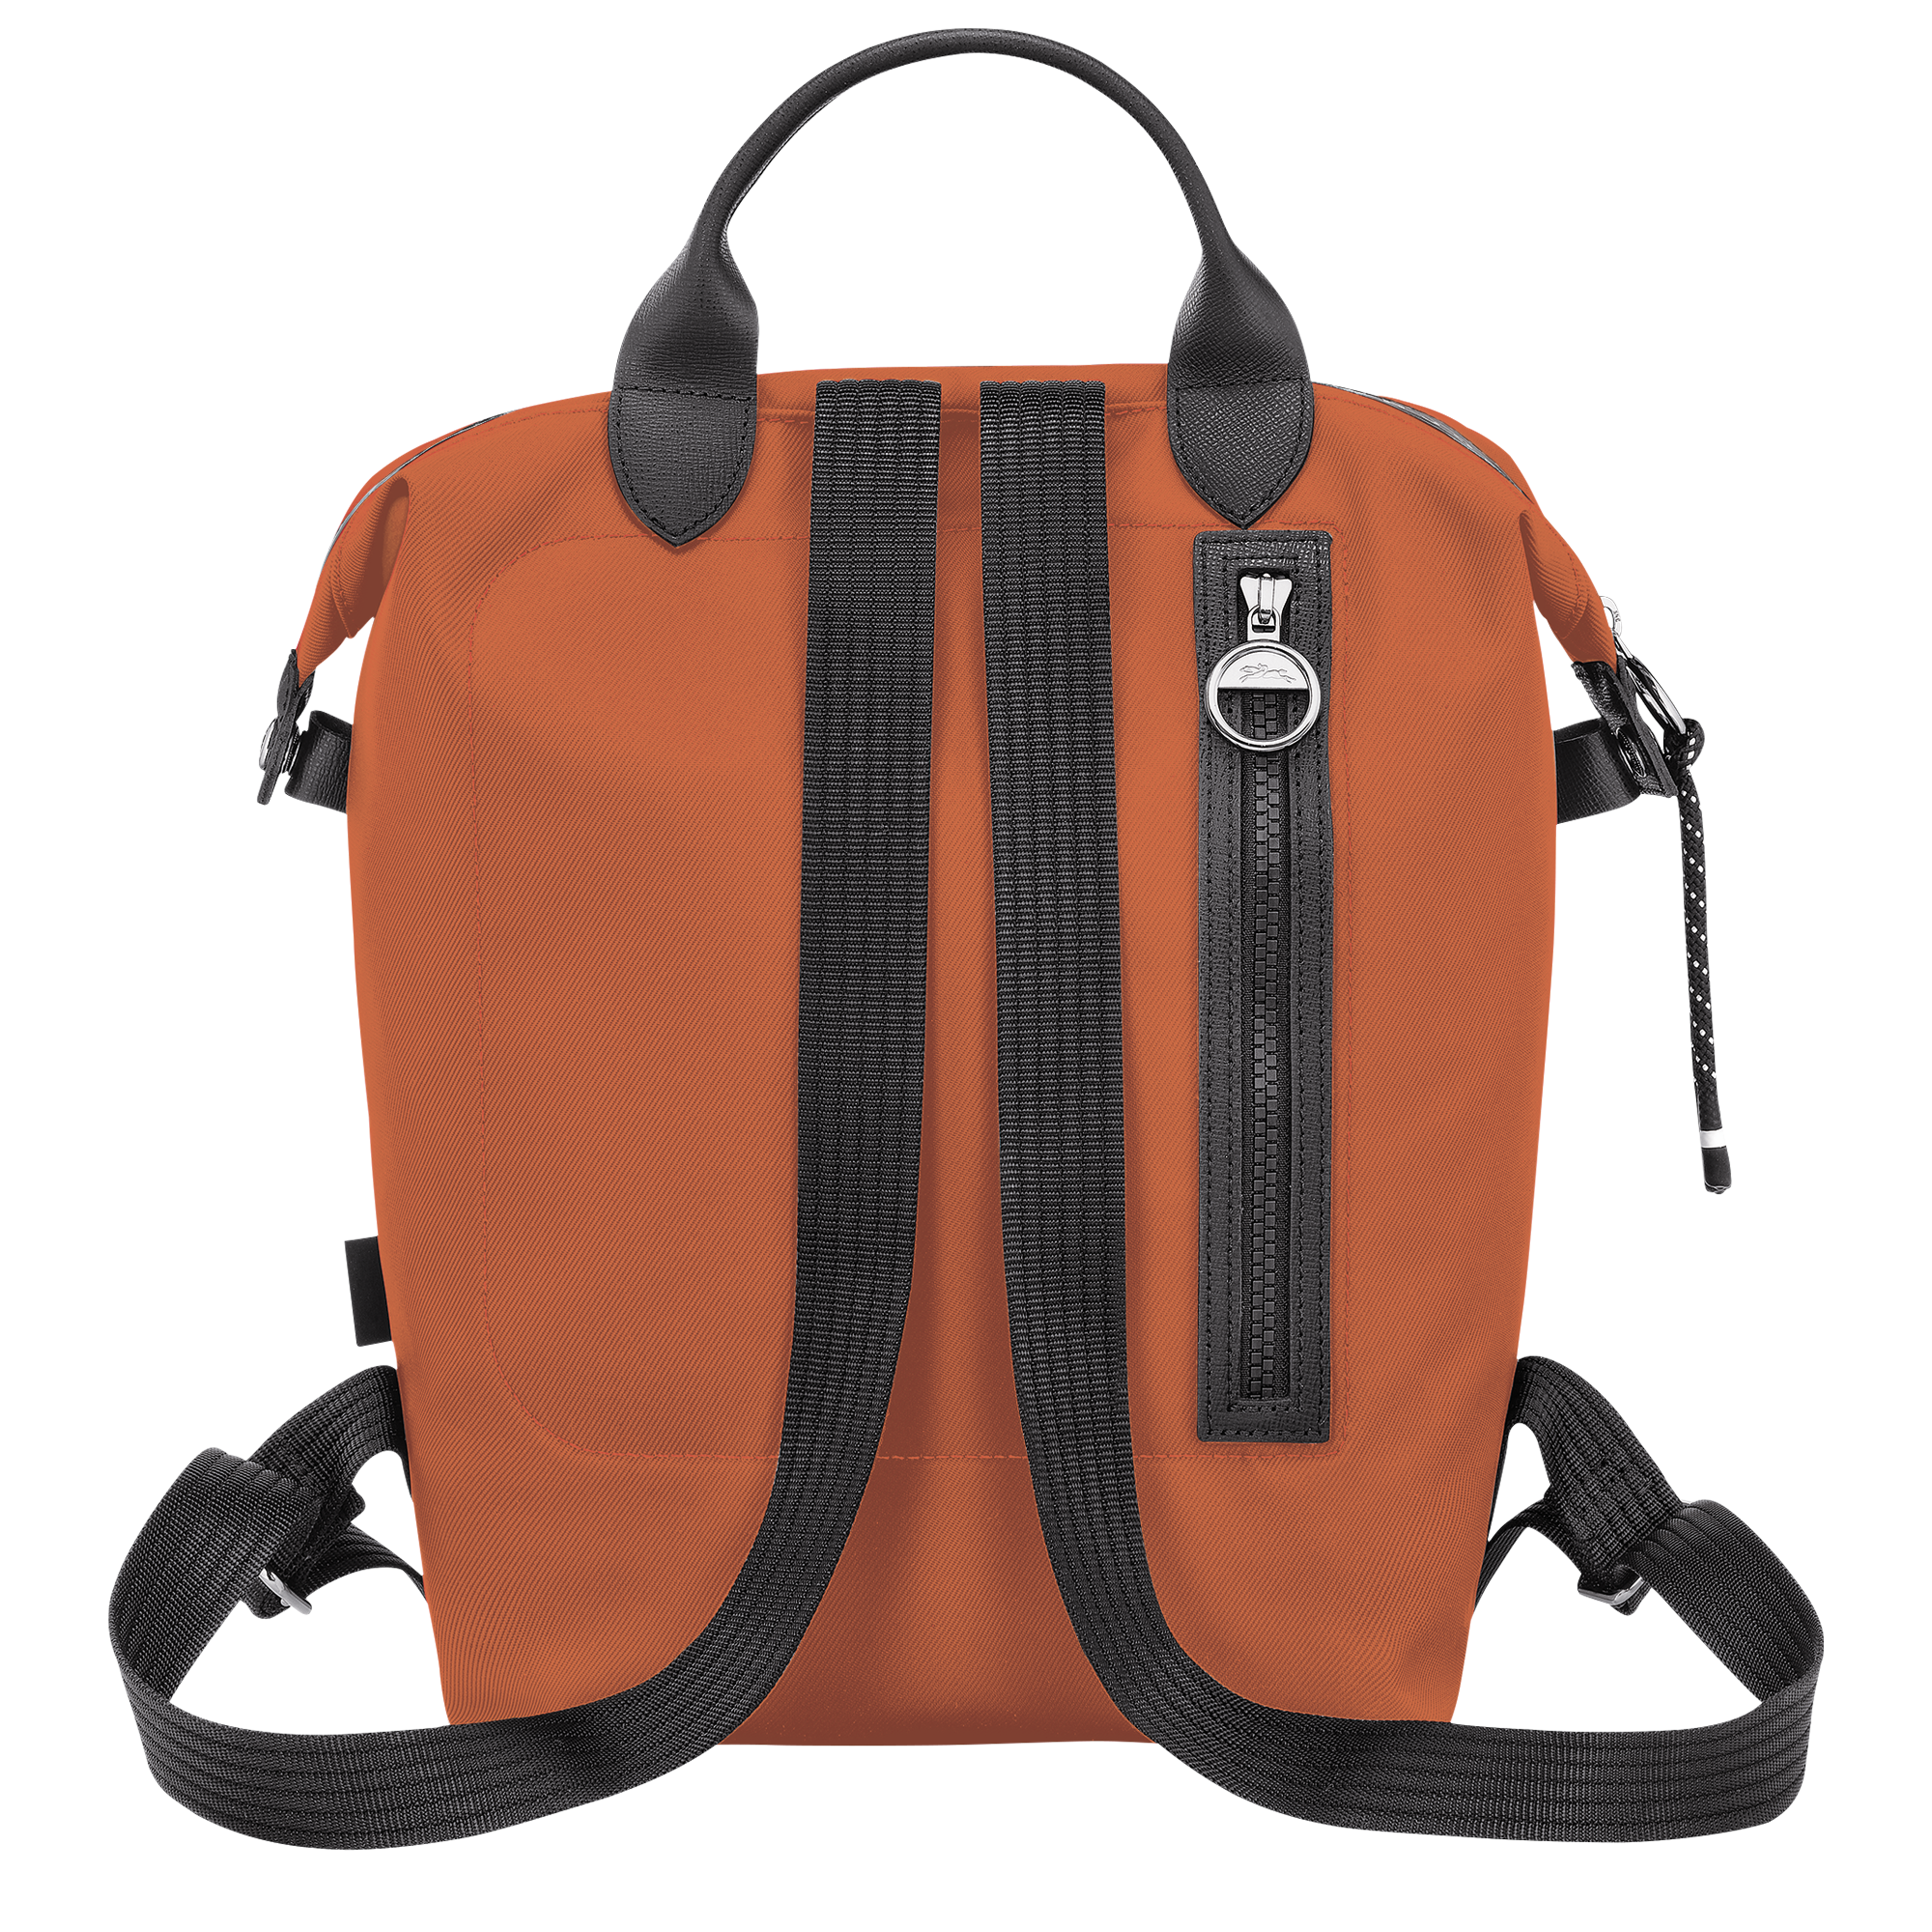 Le Pliage Energy Backpack, Sienna